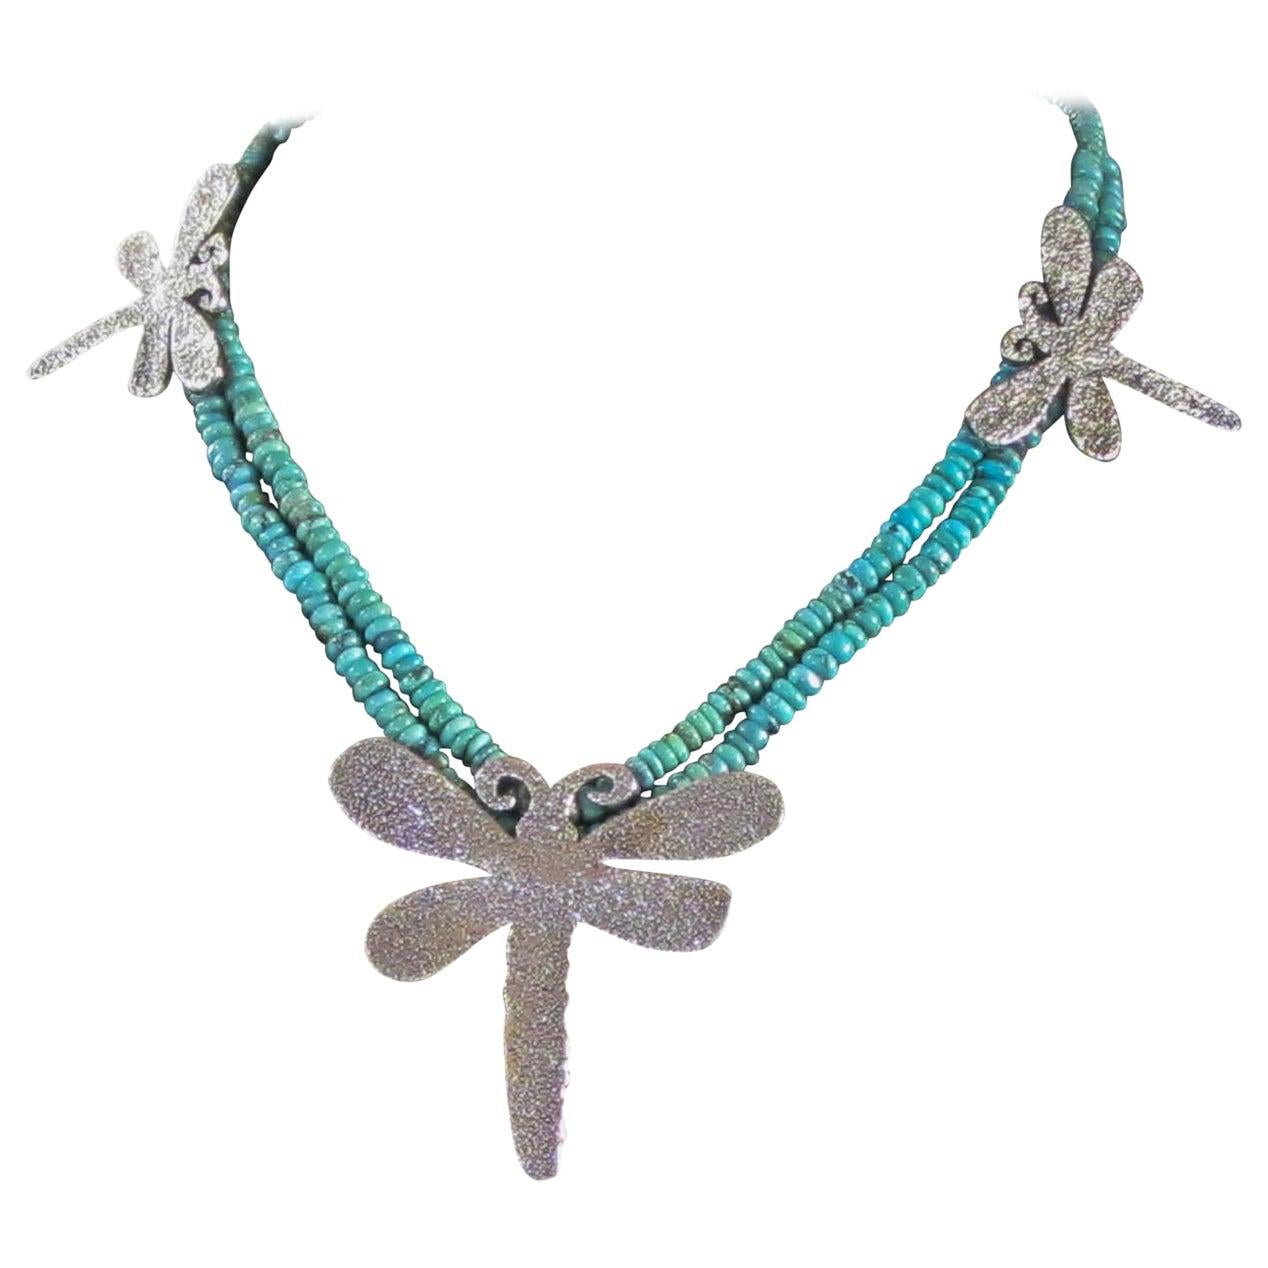 Dragonfly necklace, cast silver, Kingman turquoise, beads, Navajo, artist design